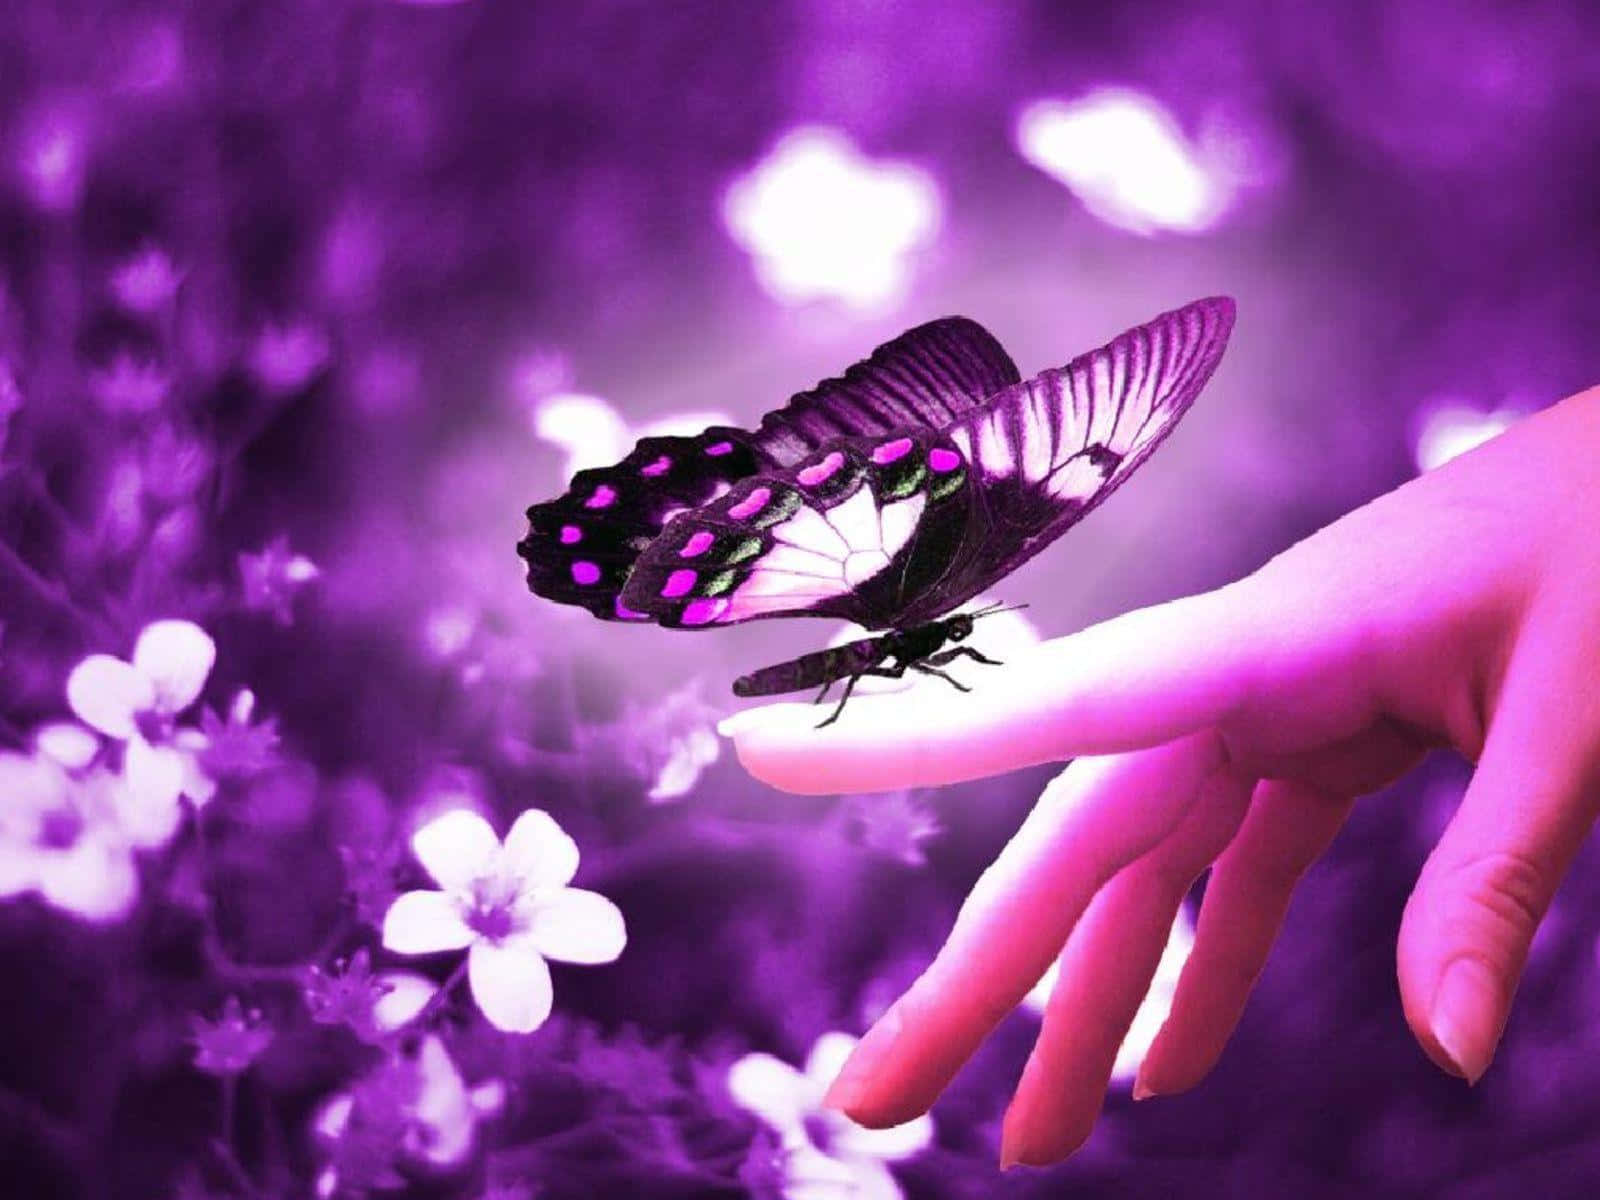 Enjoy This Colorful Cool Butterfly Wallpaper